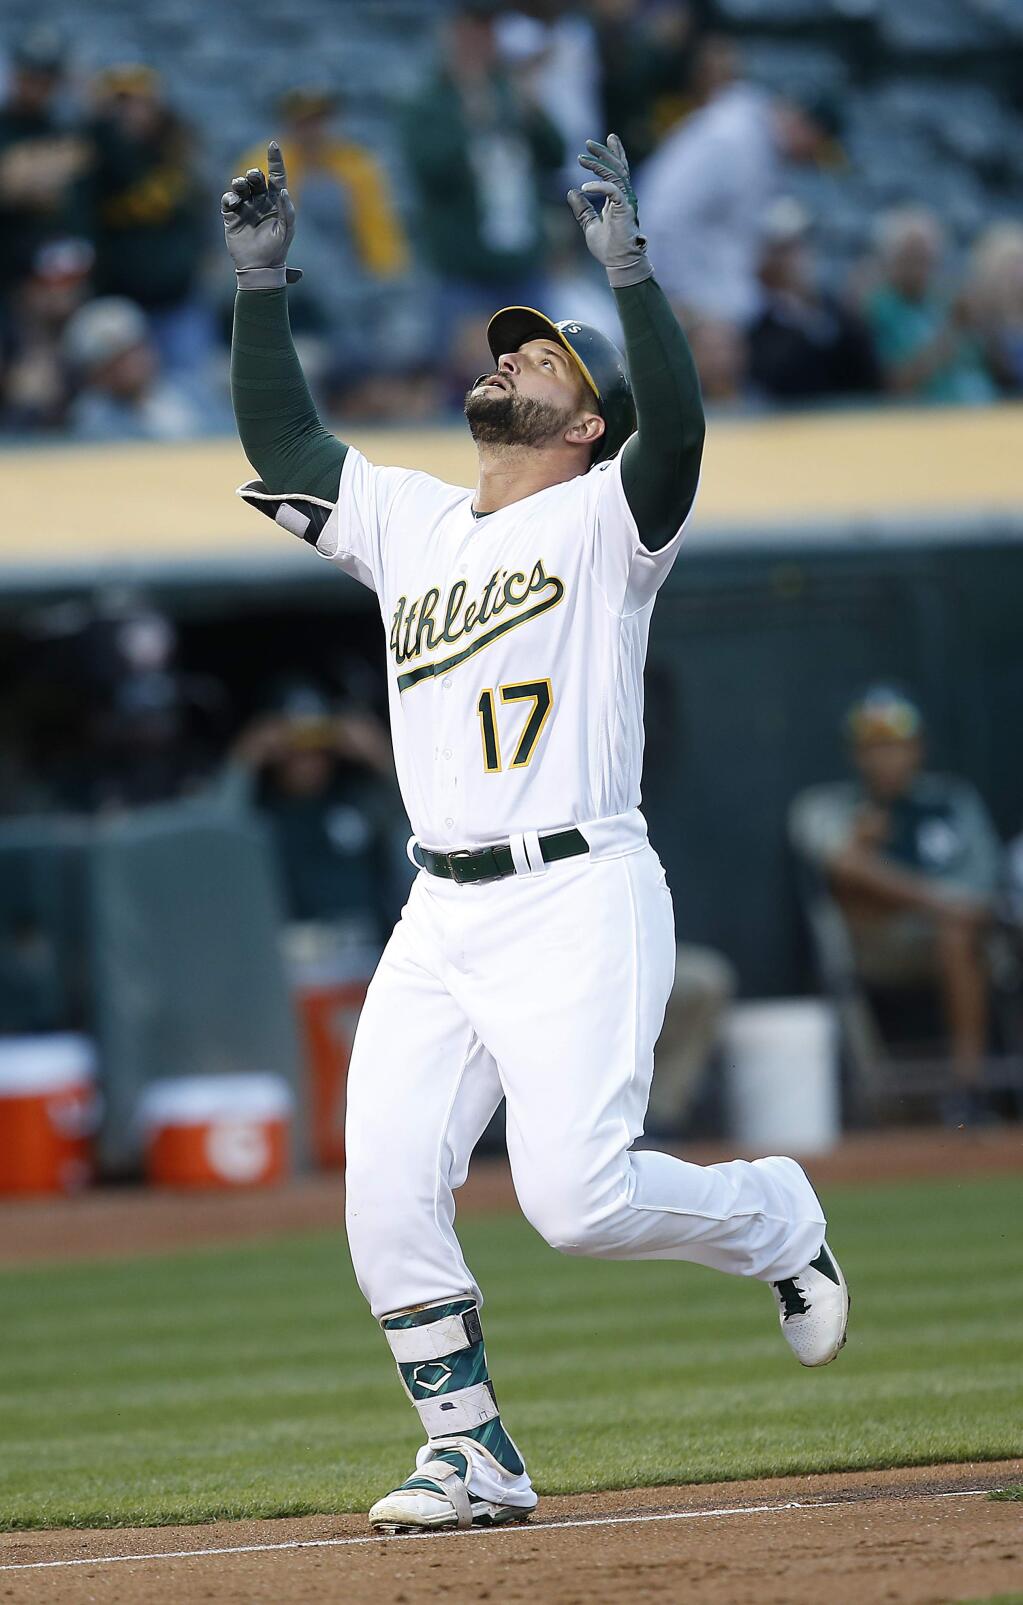 Oakland Athletics' Yonder Alonso celebrates as he crosses home plate after hitting a solo home run against the Miami Marlins during the second inning on Tuesday, May 23, 2017 in Oakland. (AP Photo/Tony Avelar)